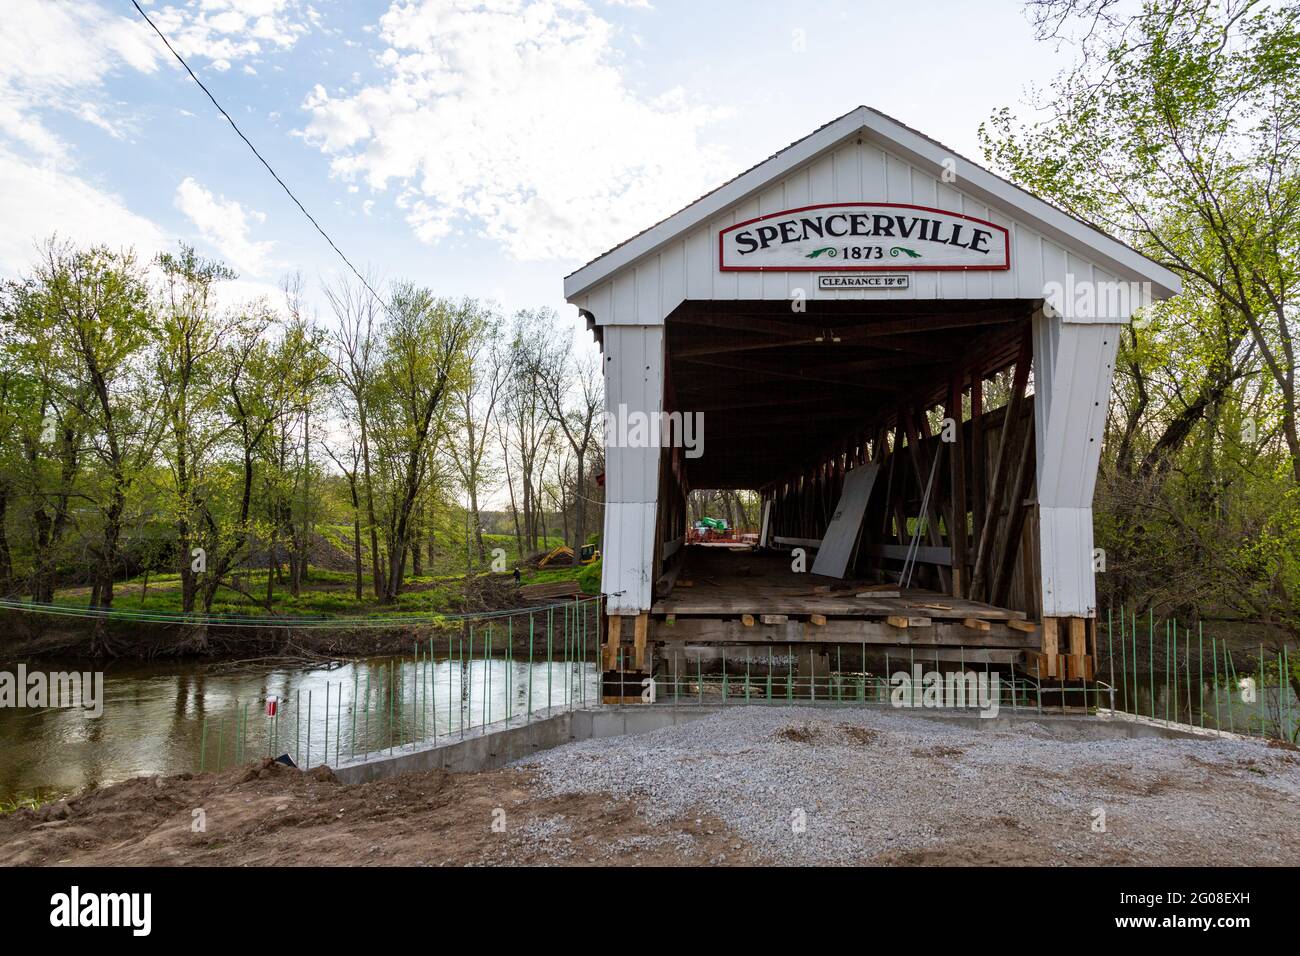 The entrance to the historic, now closed, Spencerville Covered Bridge in Spencerville, Indiana, USA. Stock Photo